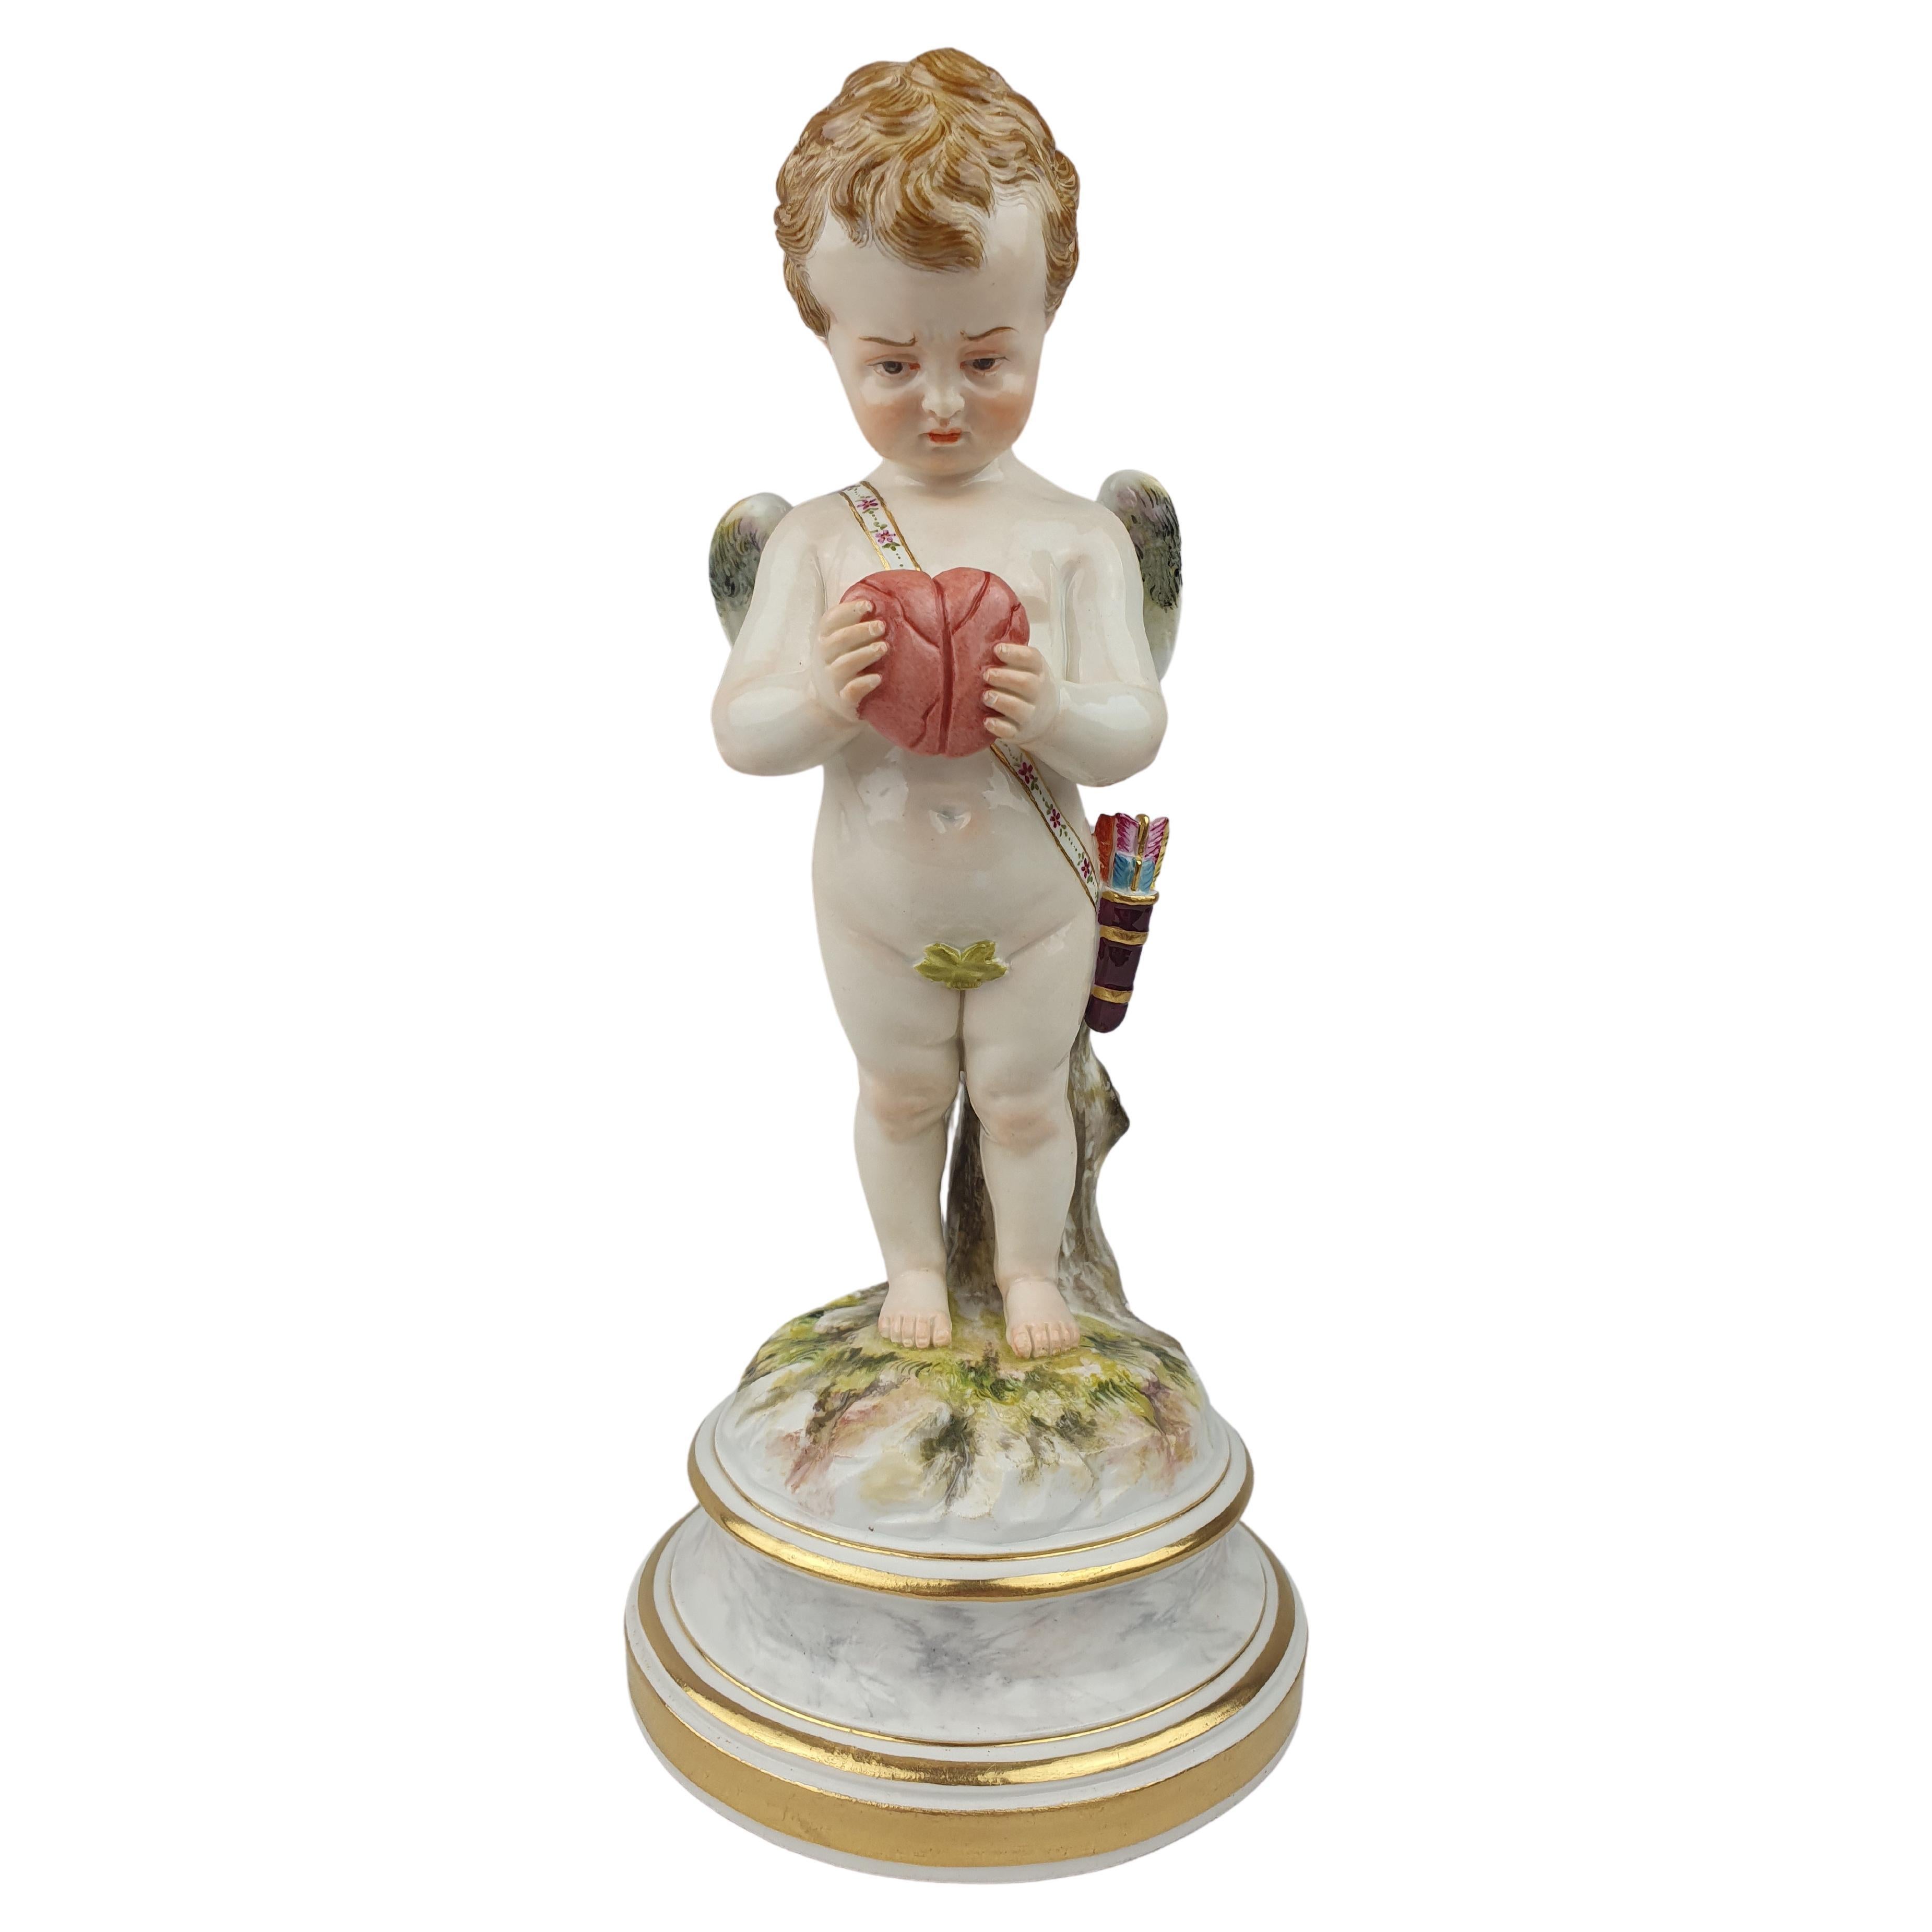 How can I tell if Meissen is real?